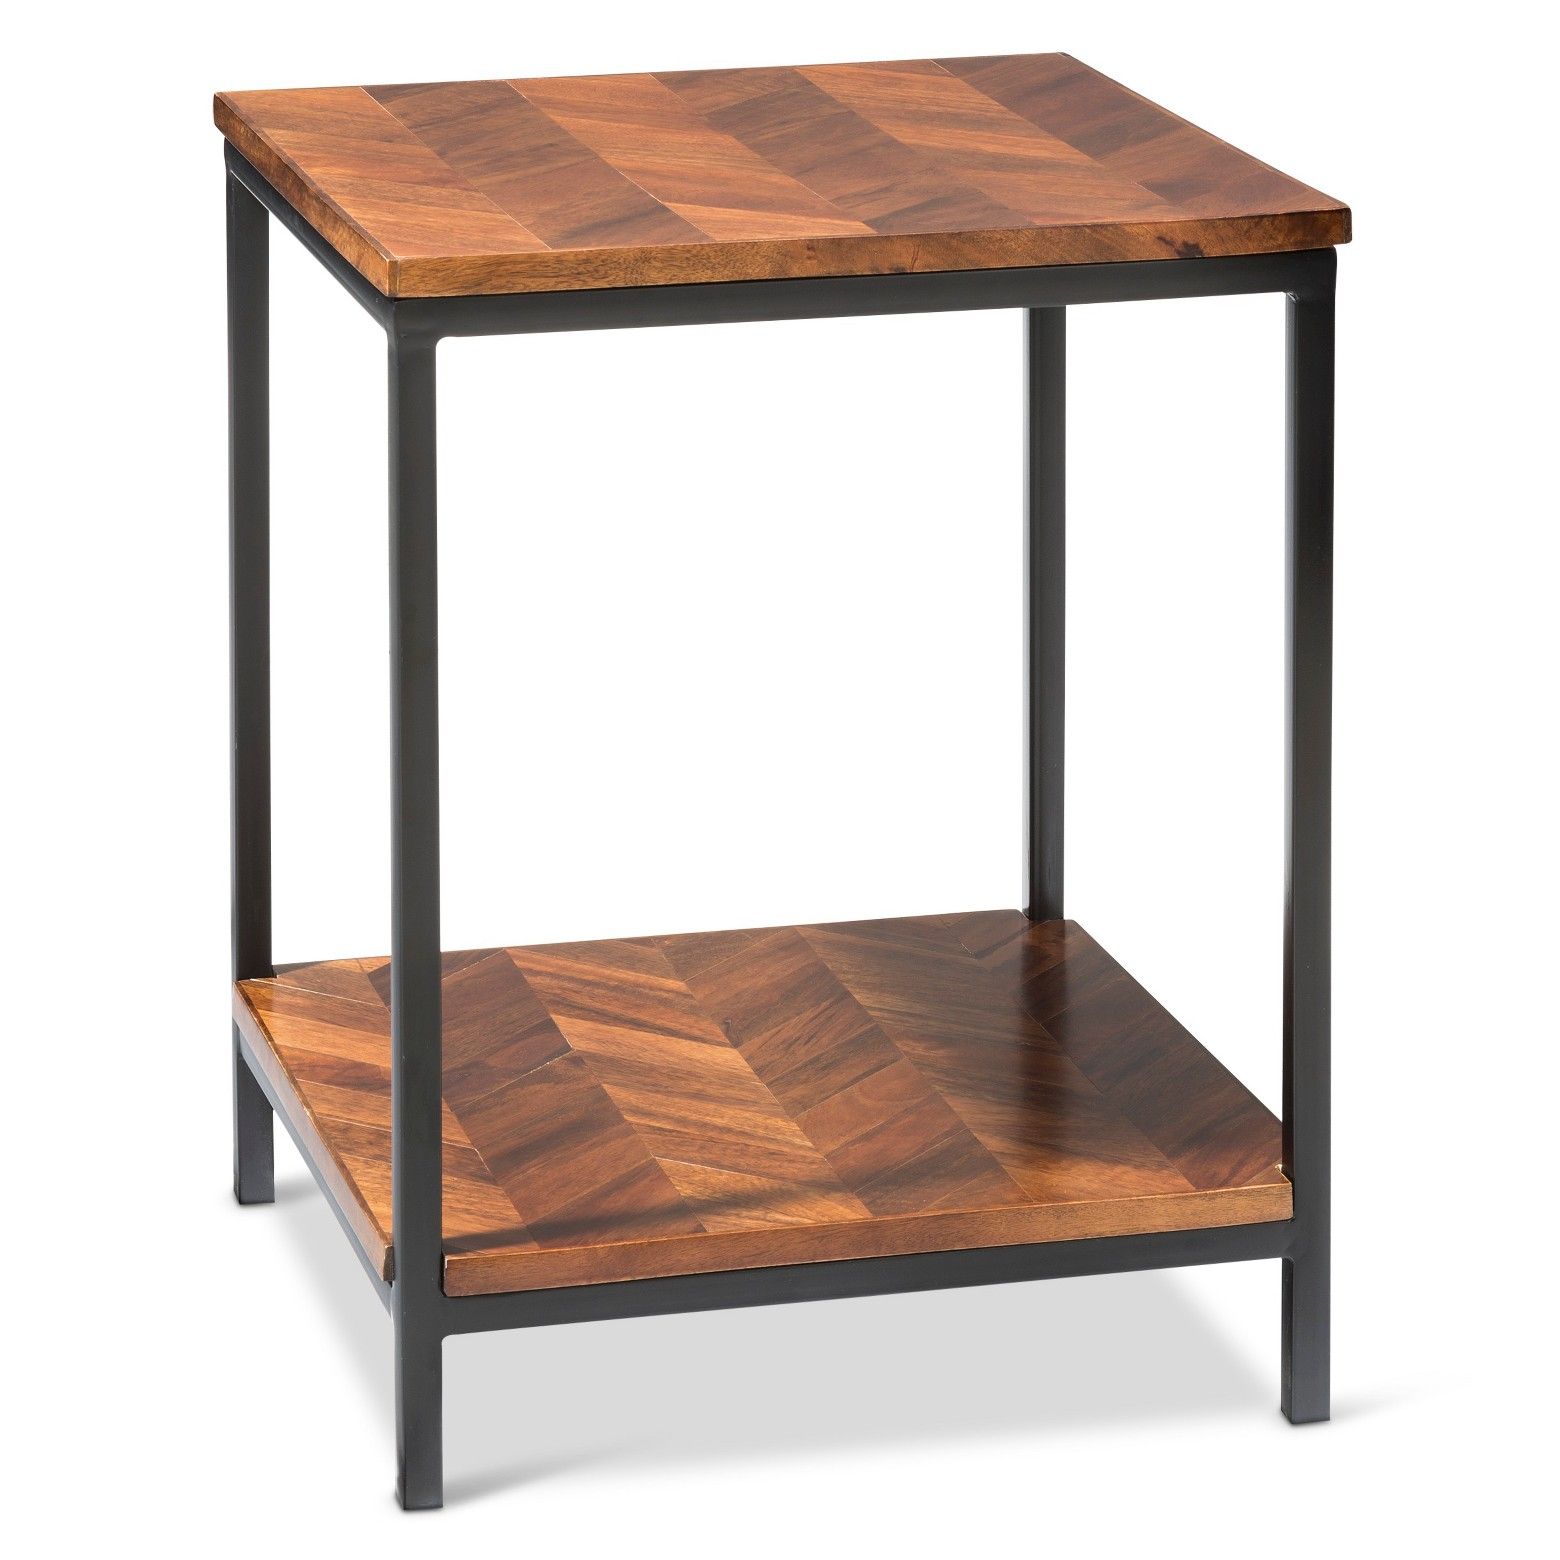 bull industrial chic stylebrbullnbspwalnut stained parquet threshold accent table wood top with black metal basebrbull sturdy designbrbull integrated shelf for sauder harbor view